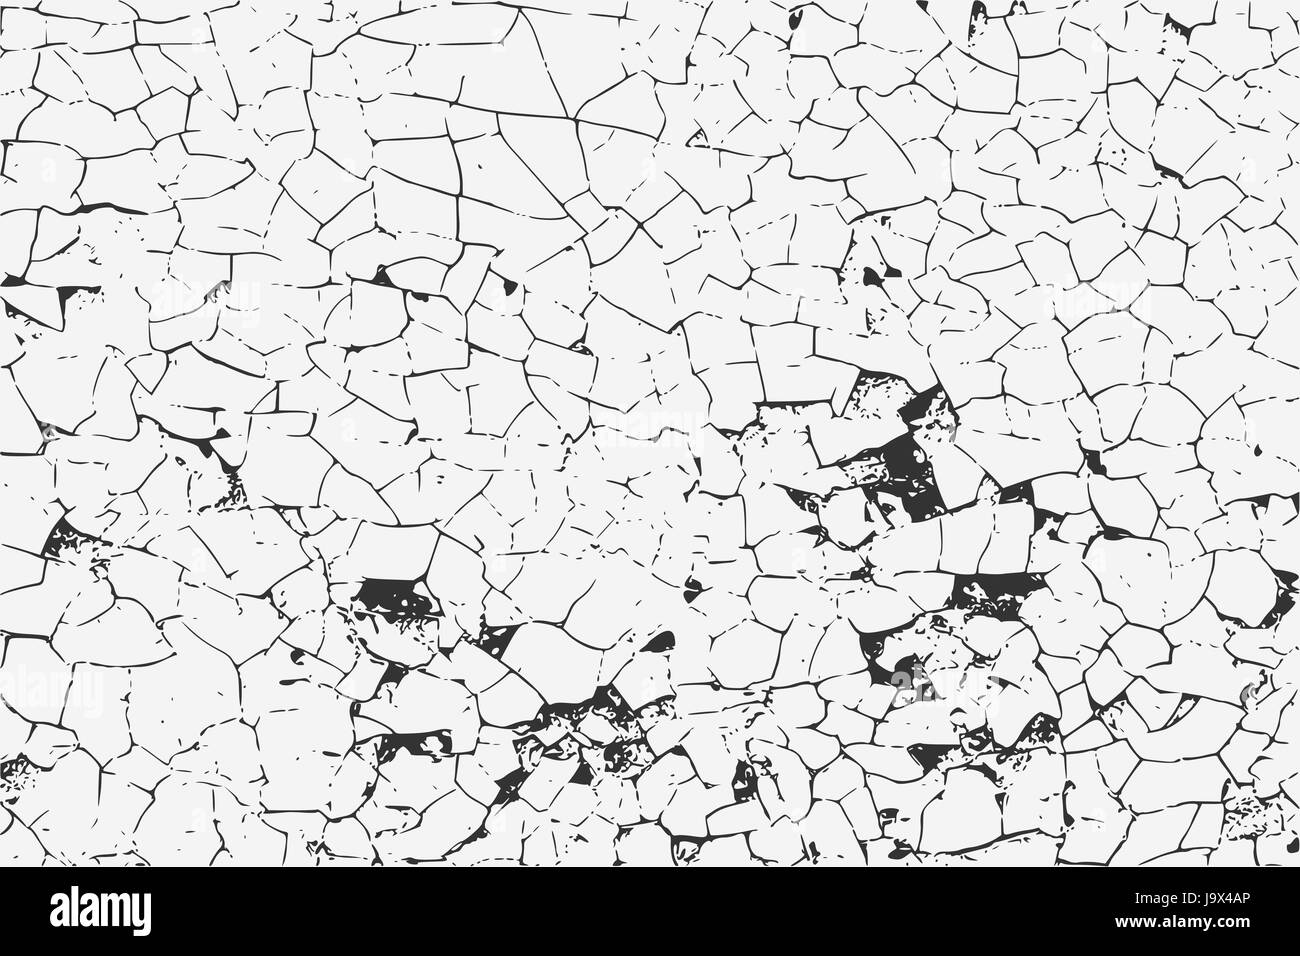 Grunge overlay texture. Vector illustration of black and white abstract grunge old weathered cracked background for your design Stock Vector